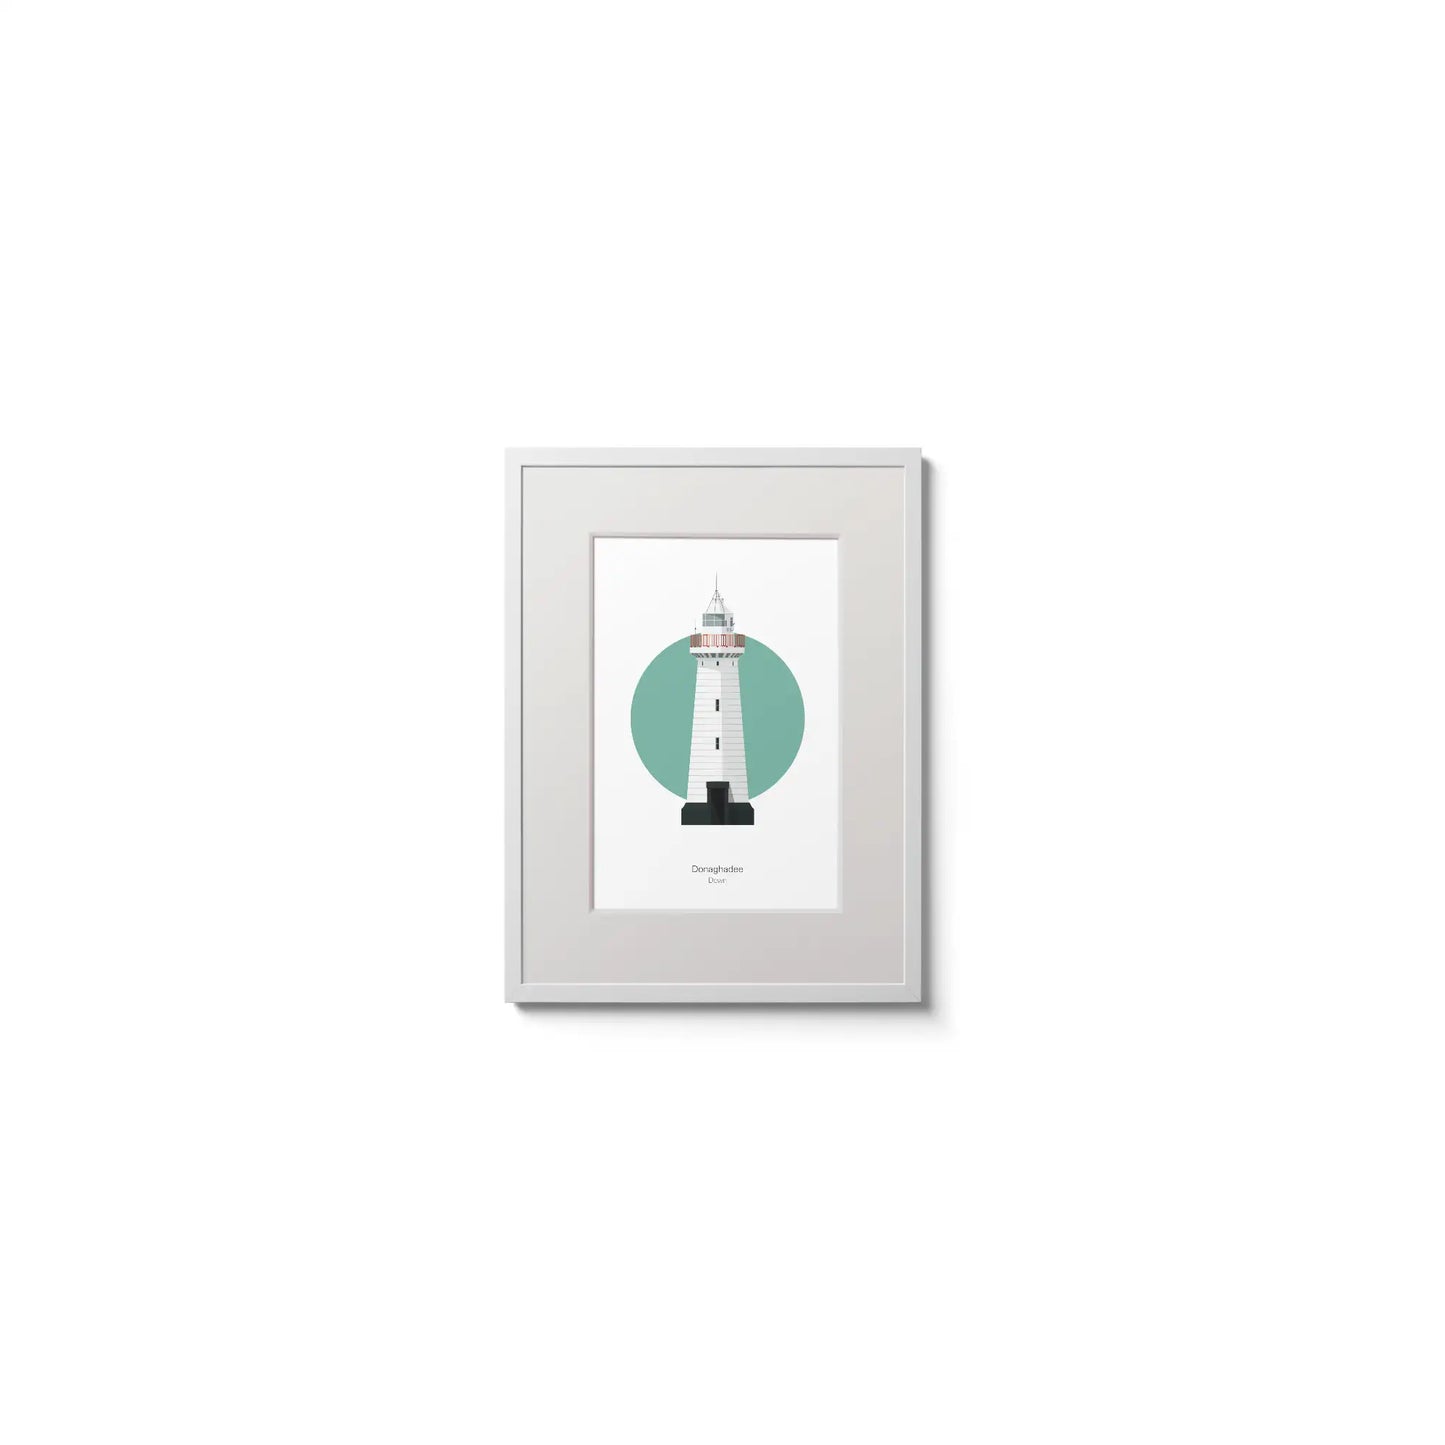 Contemporary graphic illustration of Donaghadee lighthouse on a white background inside light blue square,  in a white frame measuring 15x20cm.